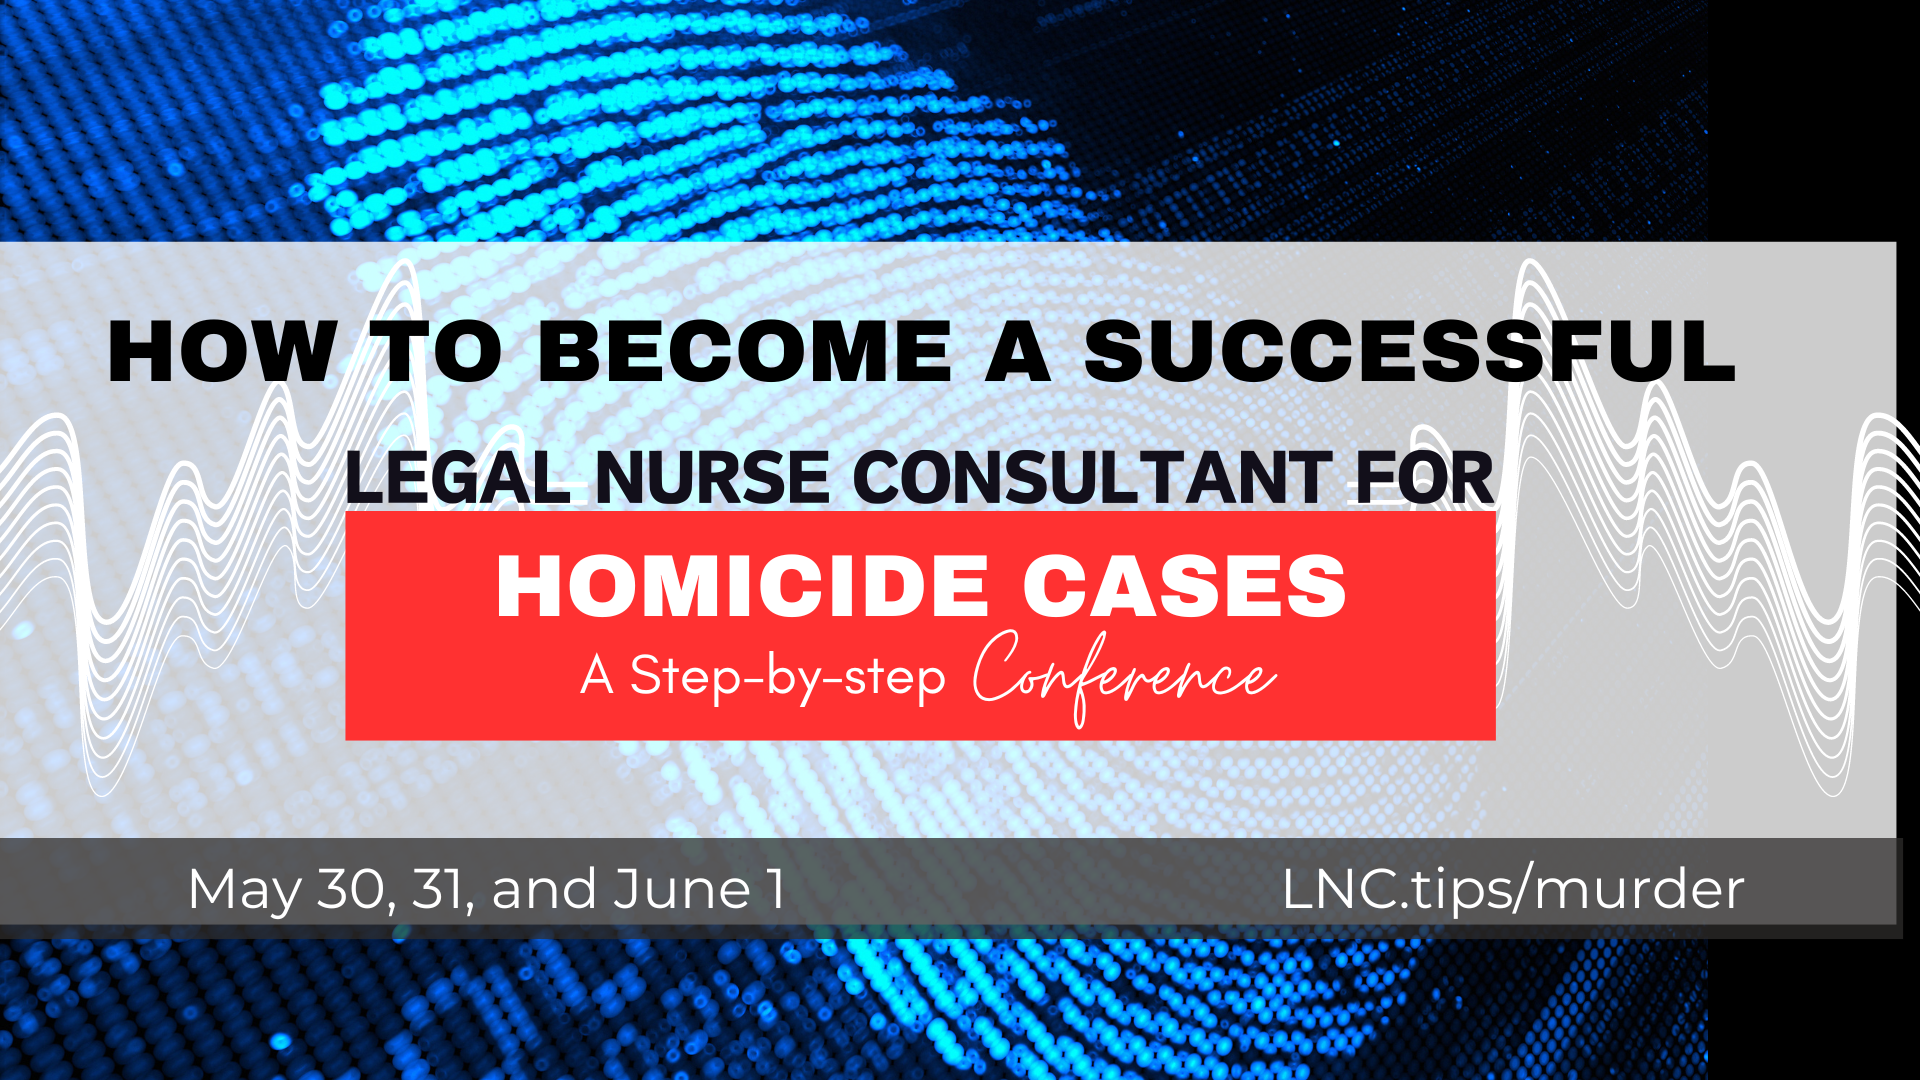 How to Become a Successful Legal Nurse Consultant for Homicide Cases: A Step-by-step Conference